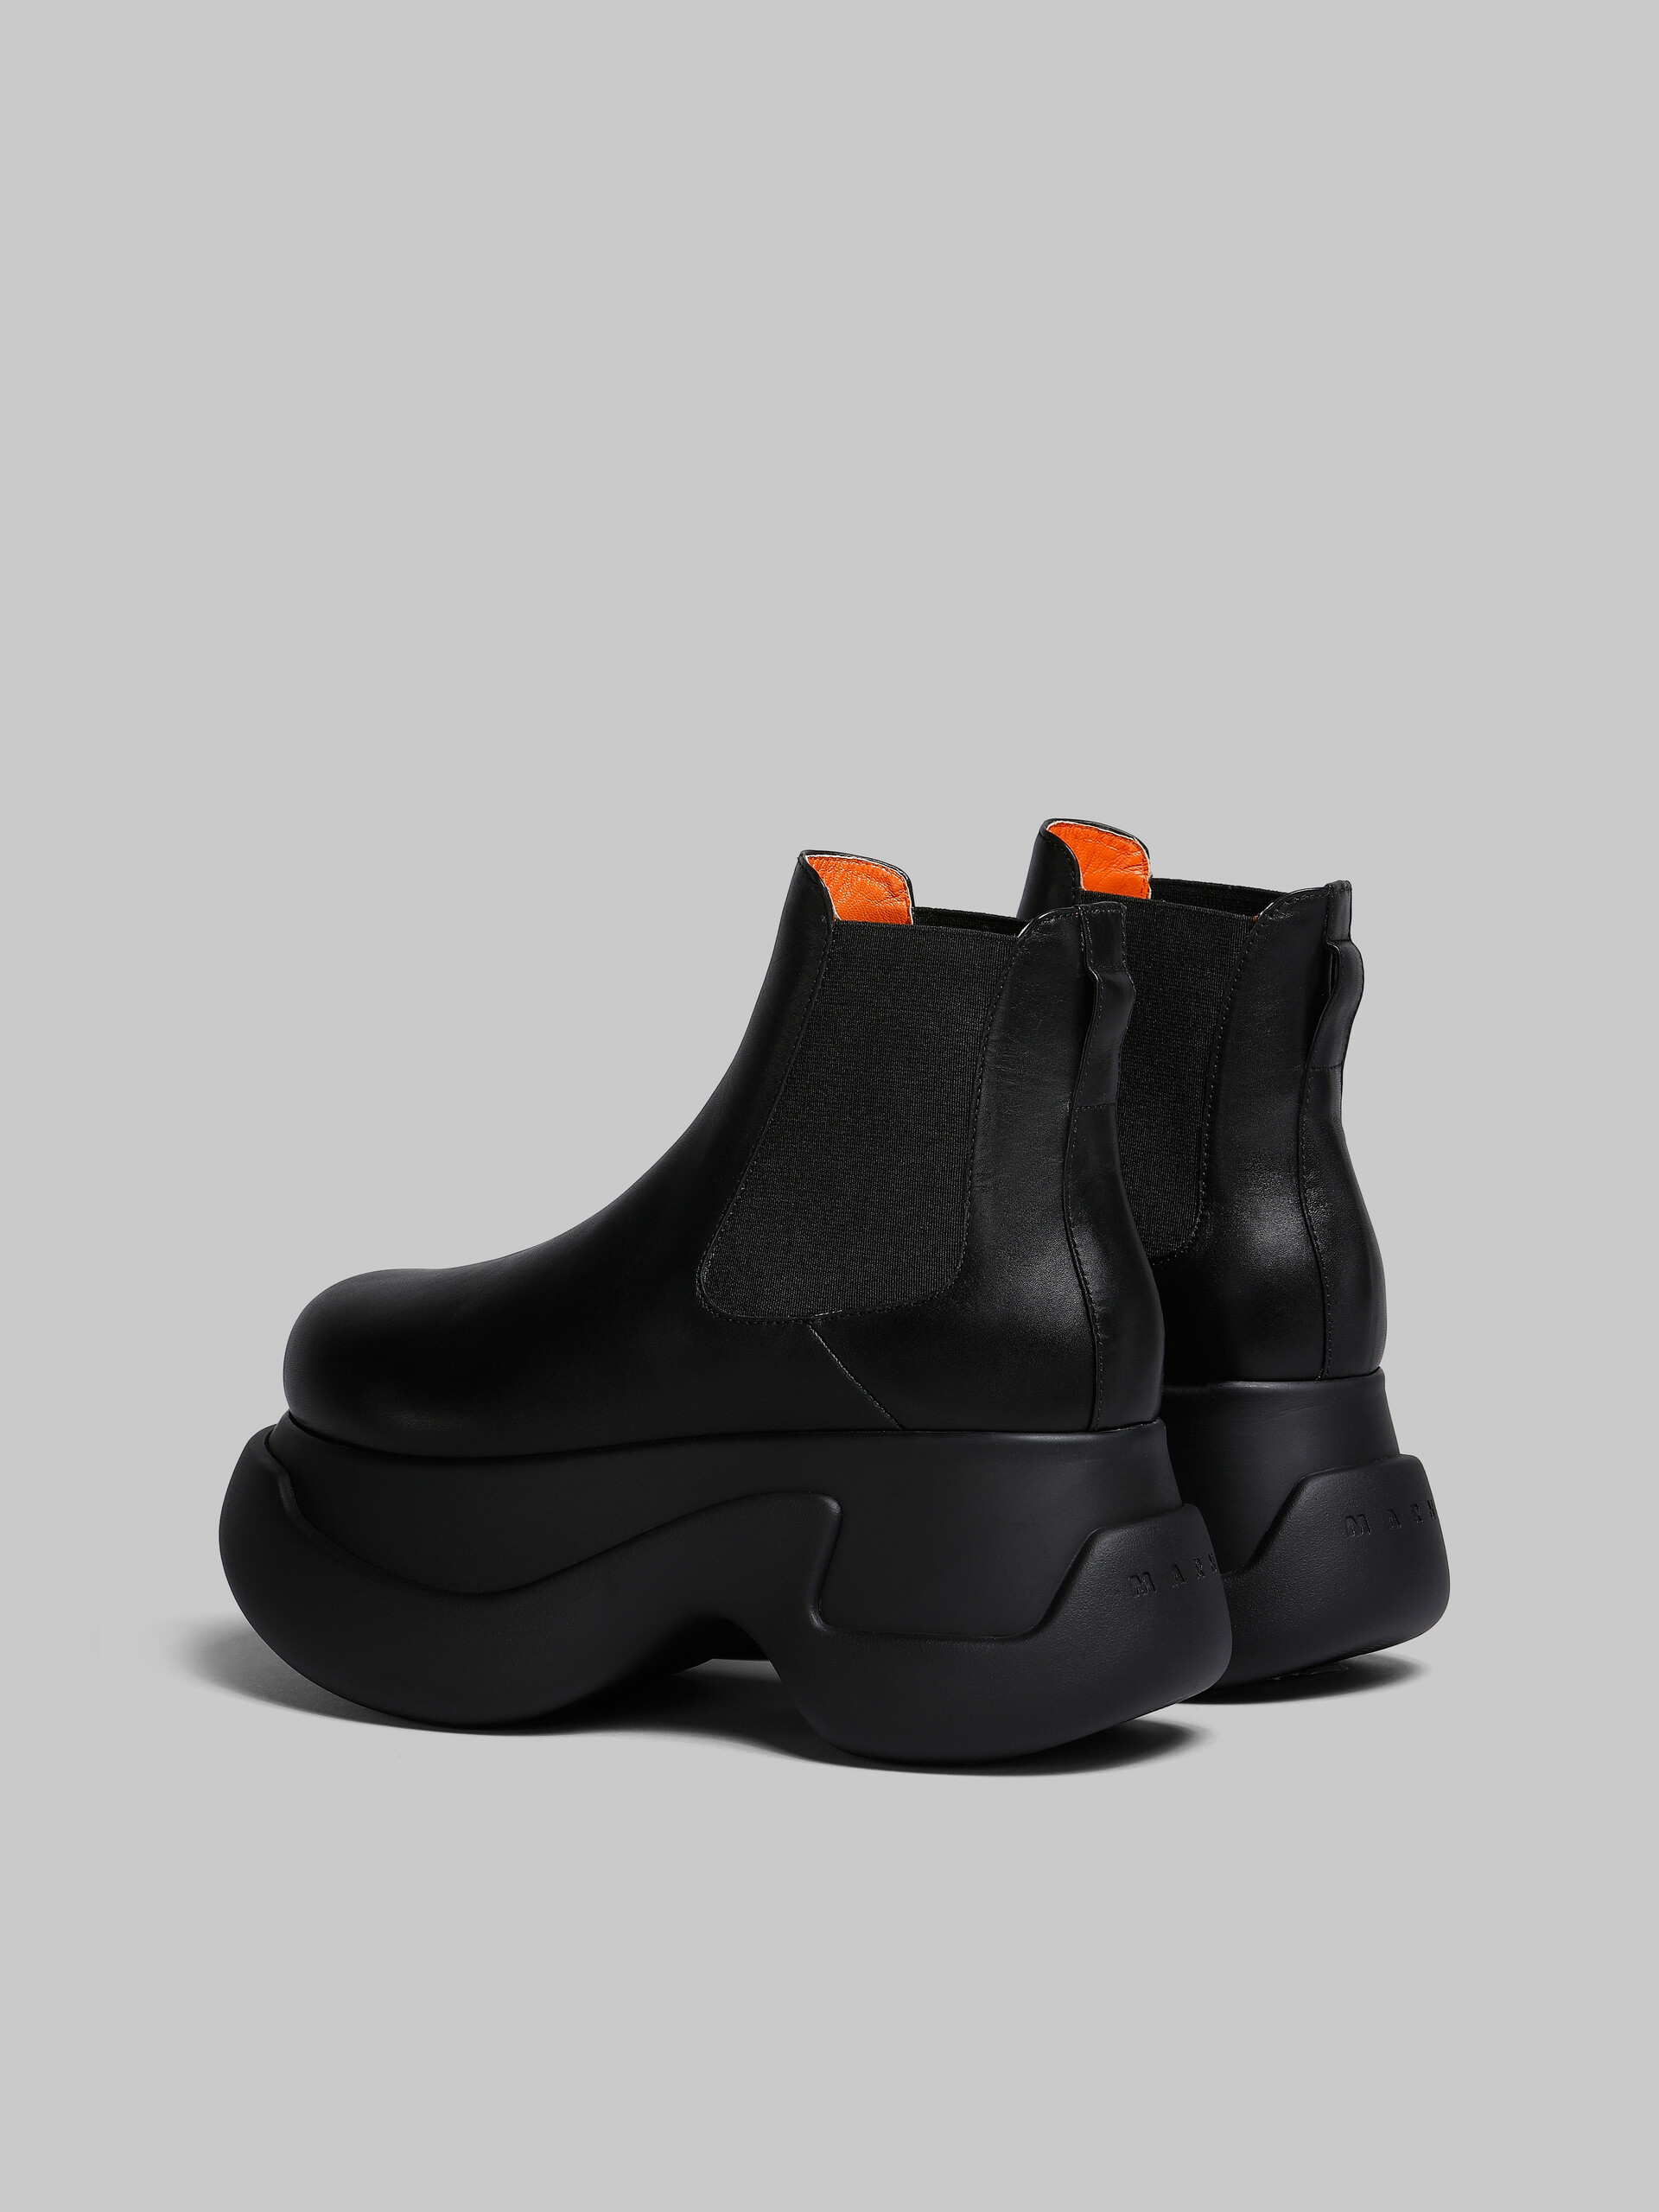 Black leather Aras 23 chelsea boot - Boots - Image 3